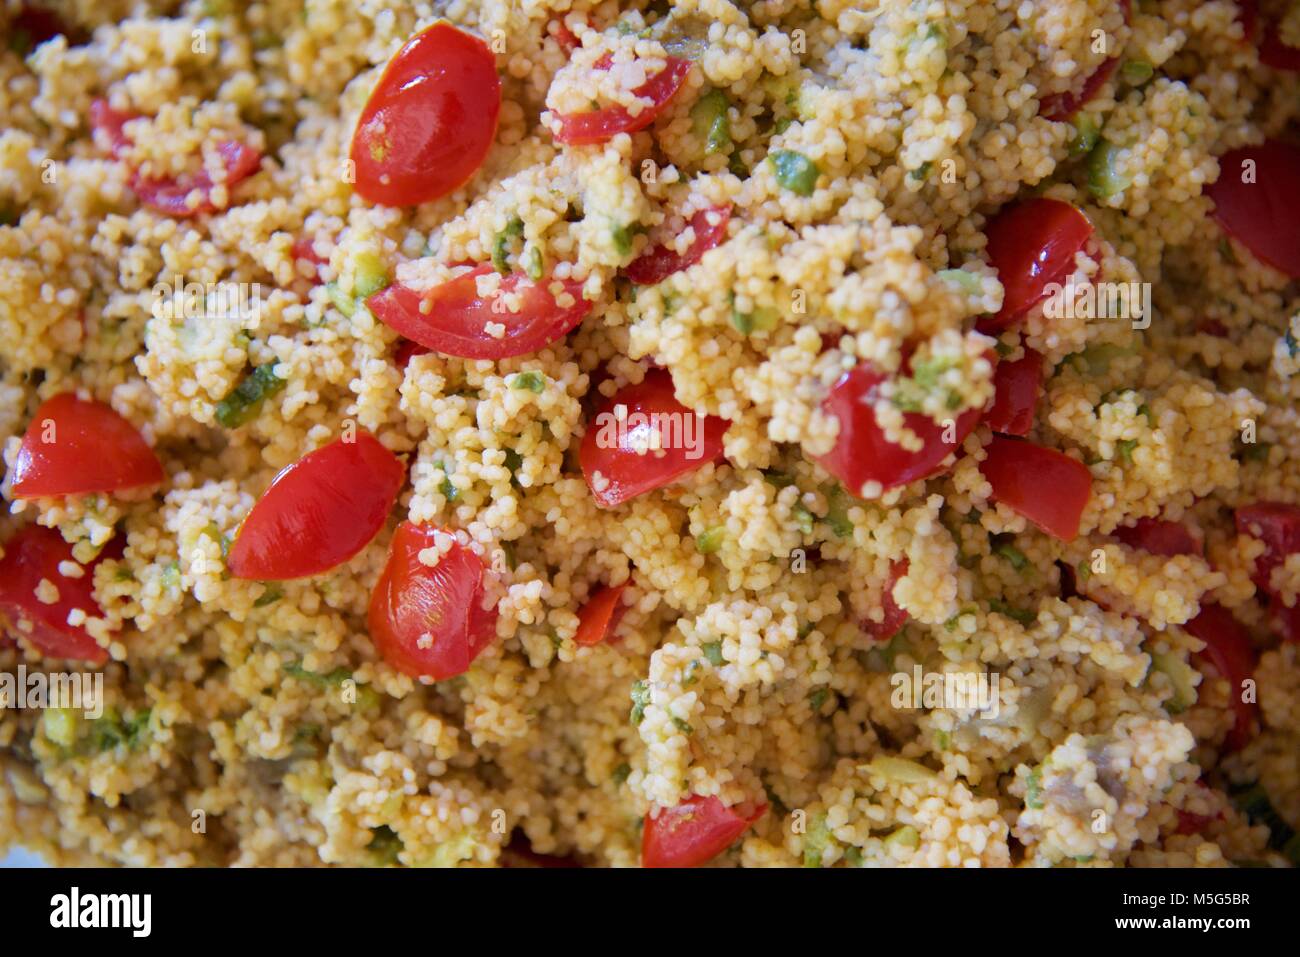 Cous cous plate Stock Photo